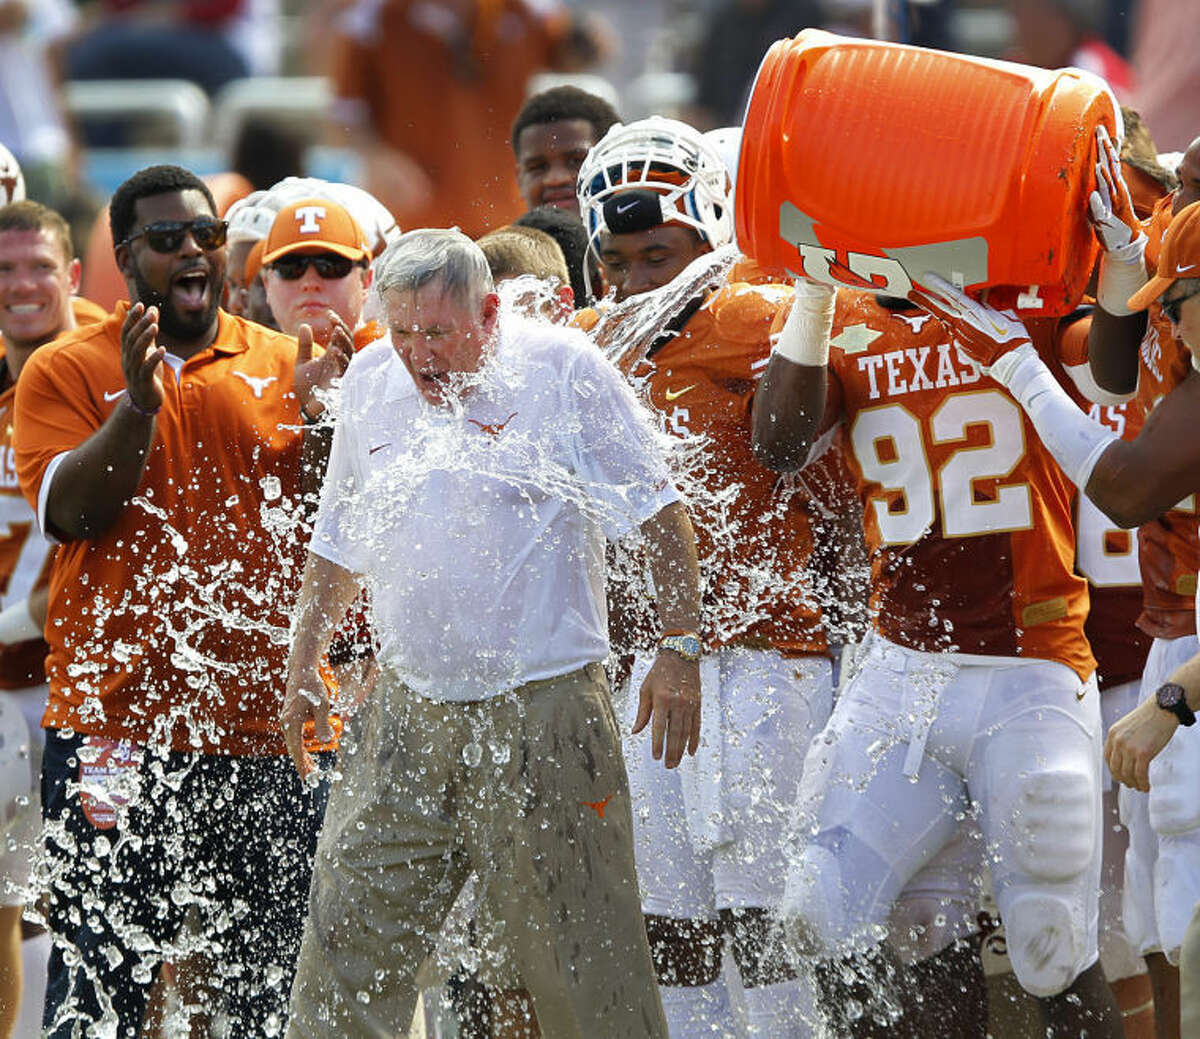 Texas head coach Mack Brown is doused with the water cooler by his players in the closing seconds of their 36-20 win over Oklahoma in an NCAA college football game at the Cotton Bowl in Dallas, Saturday, Oct. 12, 2013. (AP Photo/The Dallas Morning News, Tom Fox)